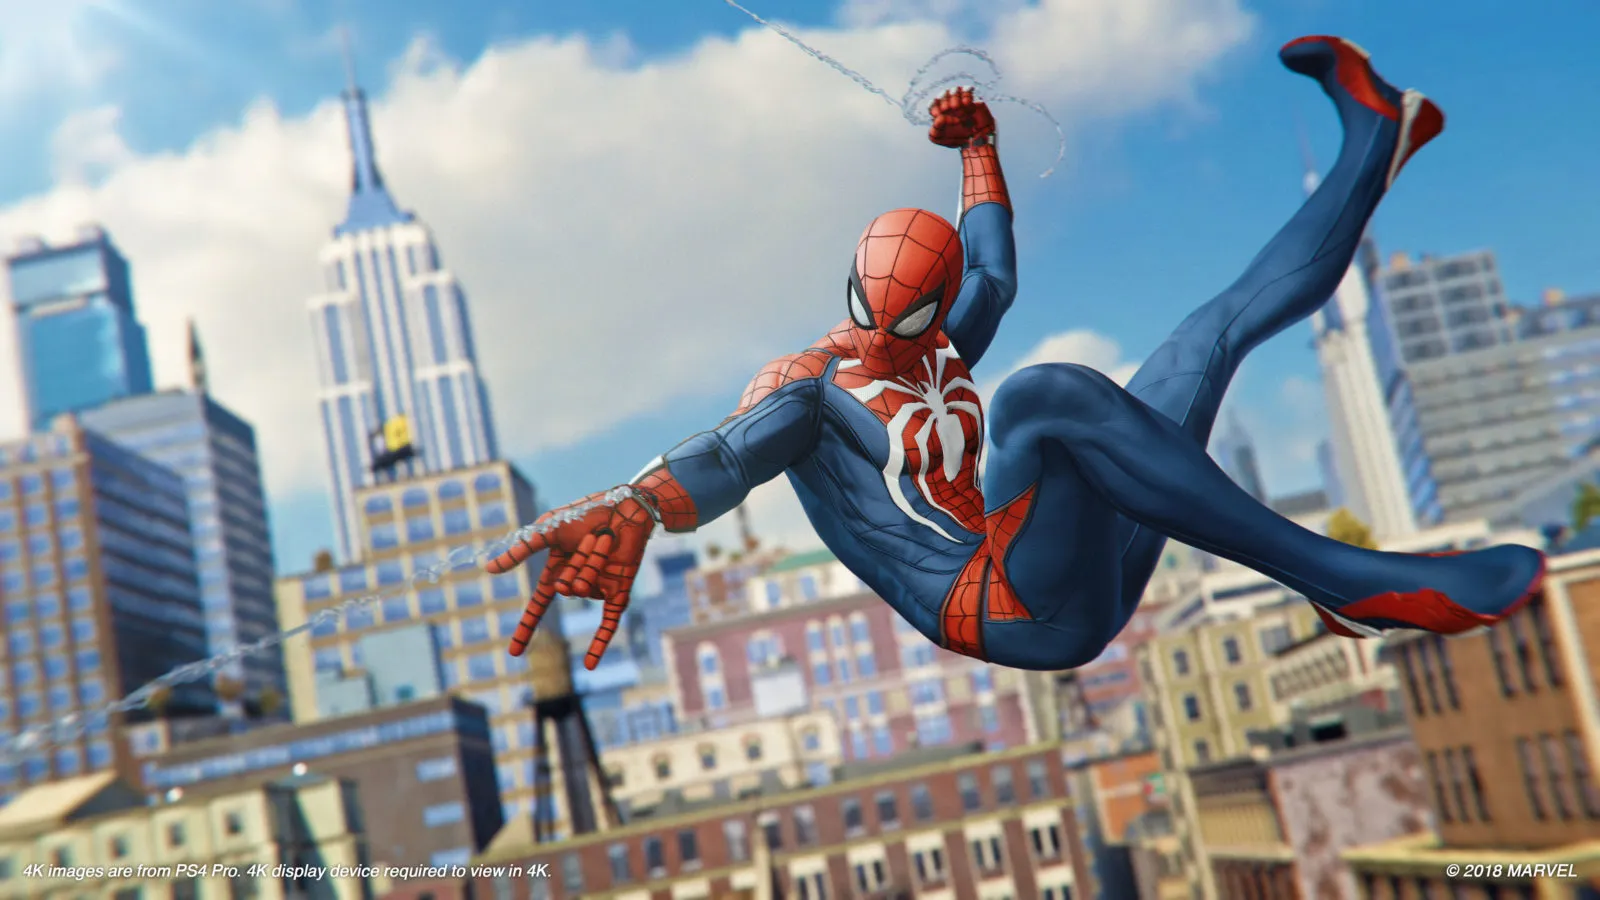 Will Spider-Man come to Xbox One, or just PS4?